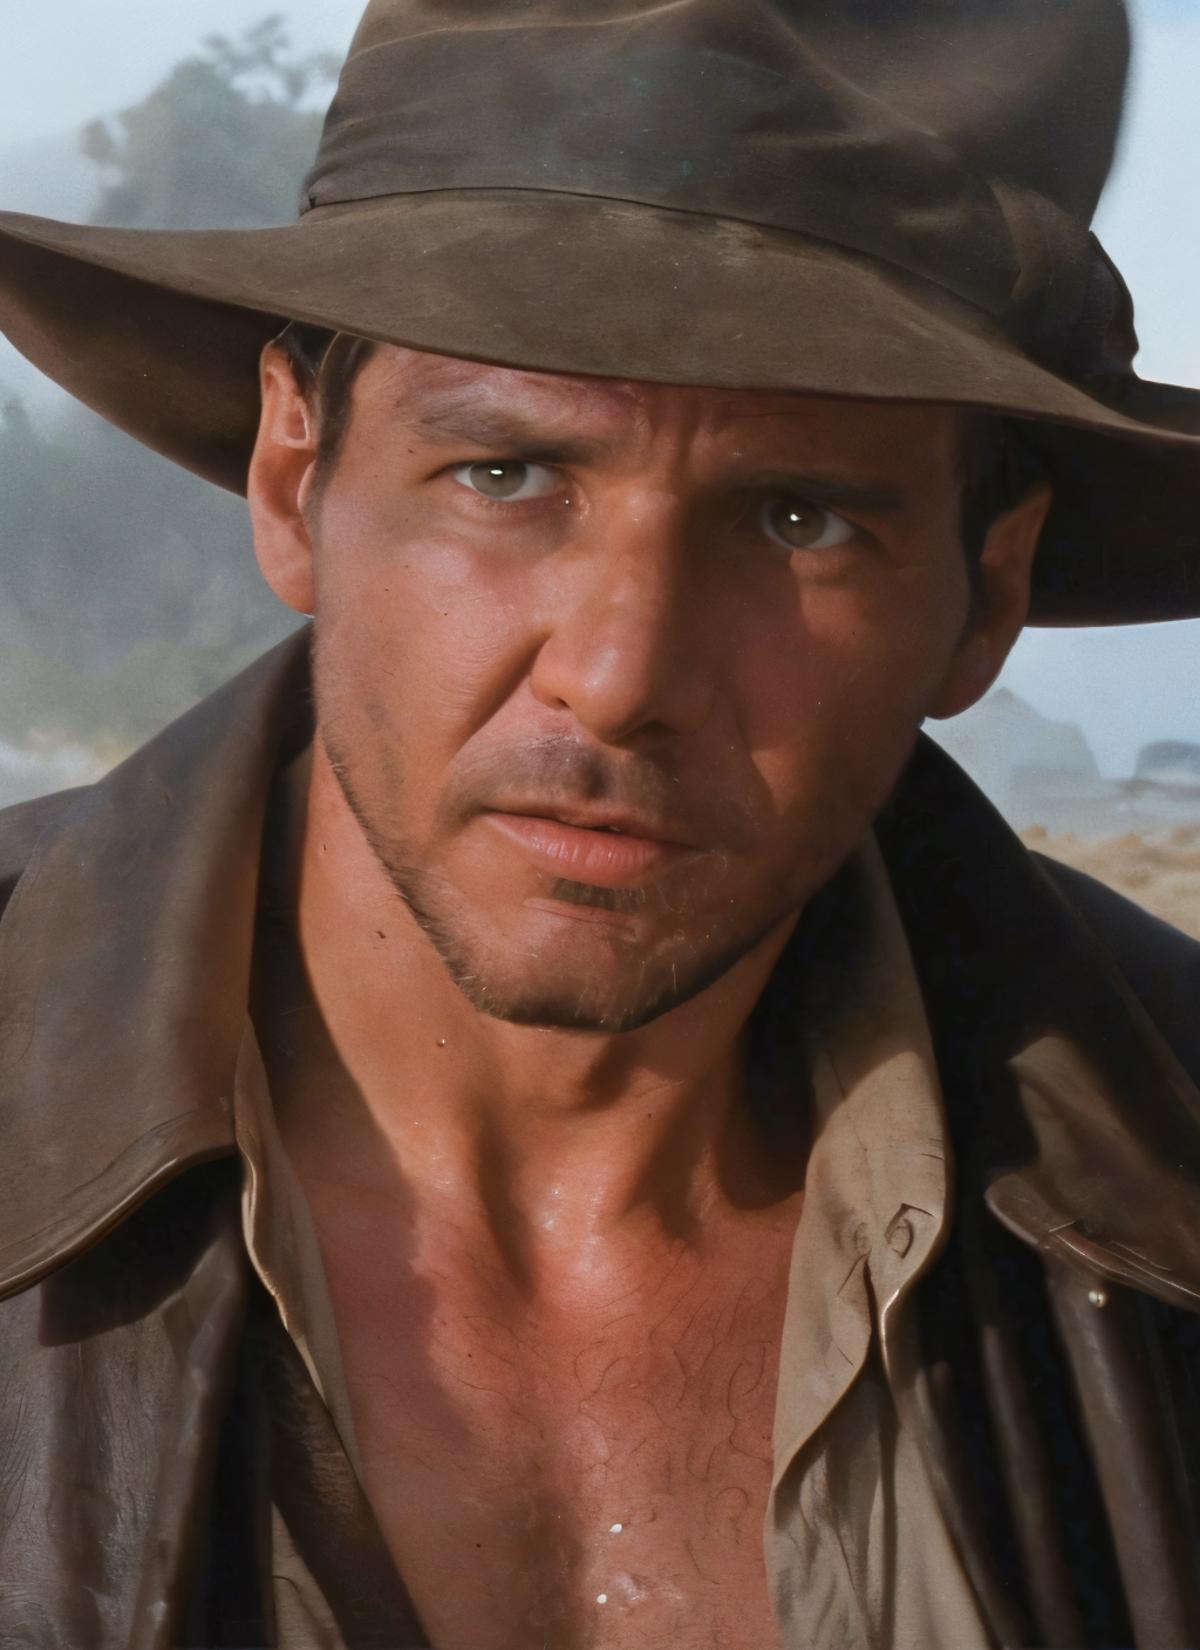 Indiana Jones (Harrison Ford) image by wensleyp01